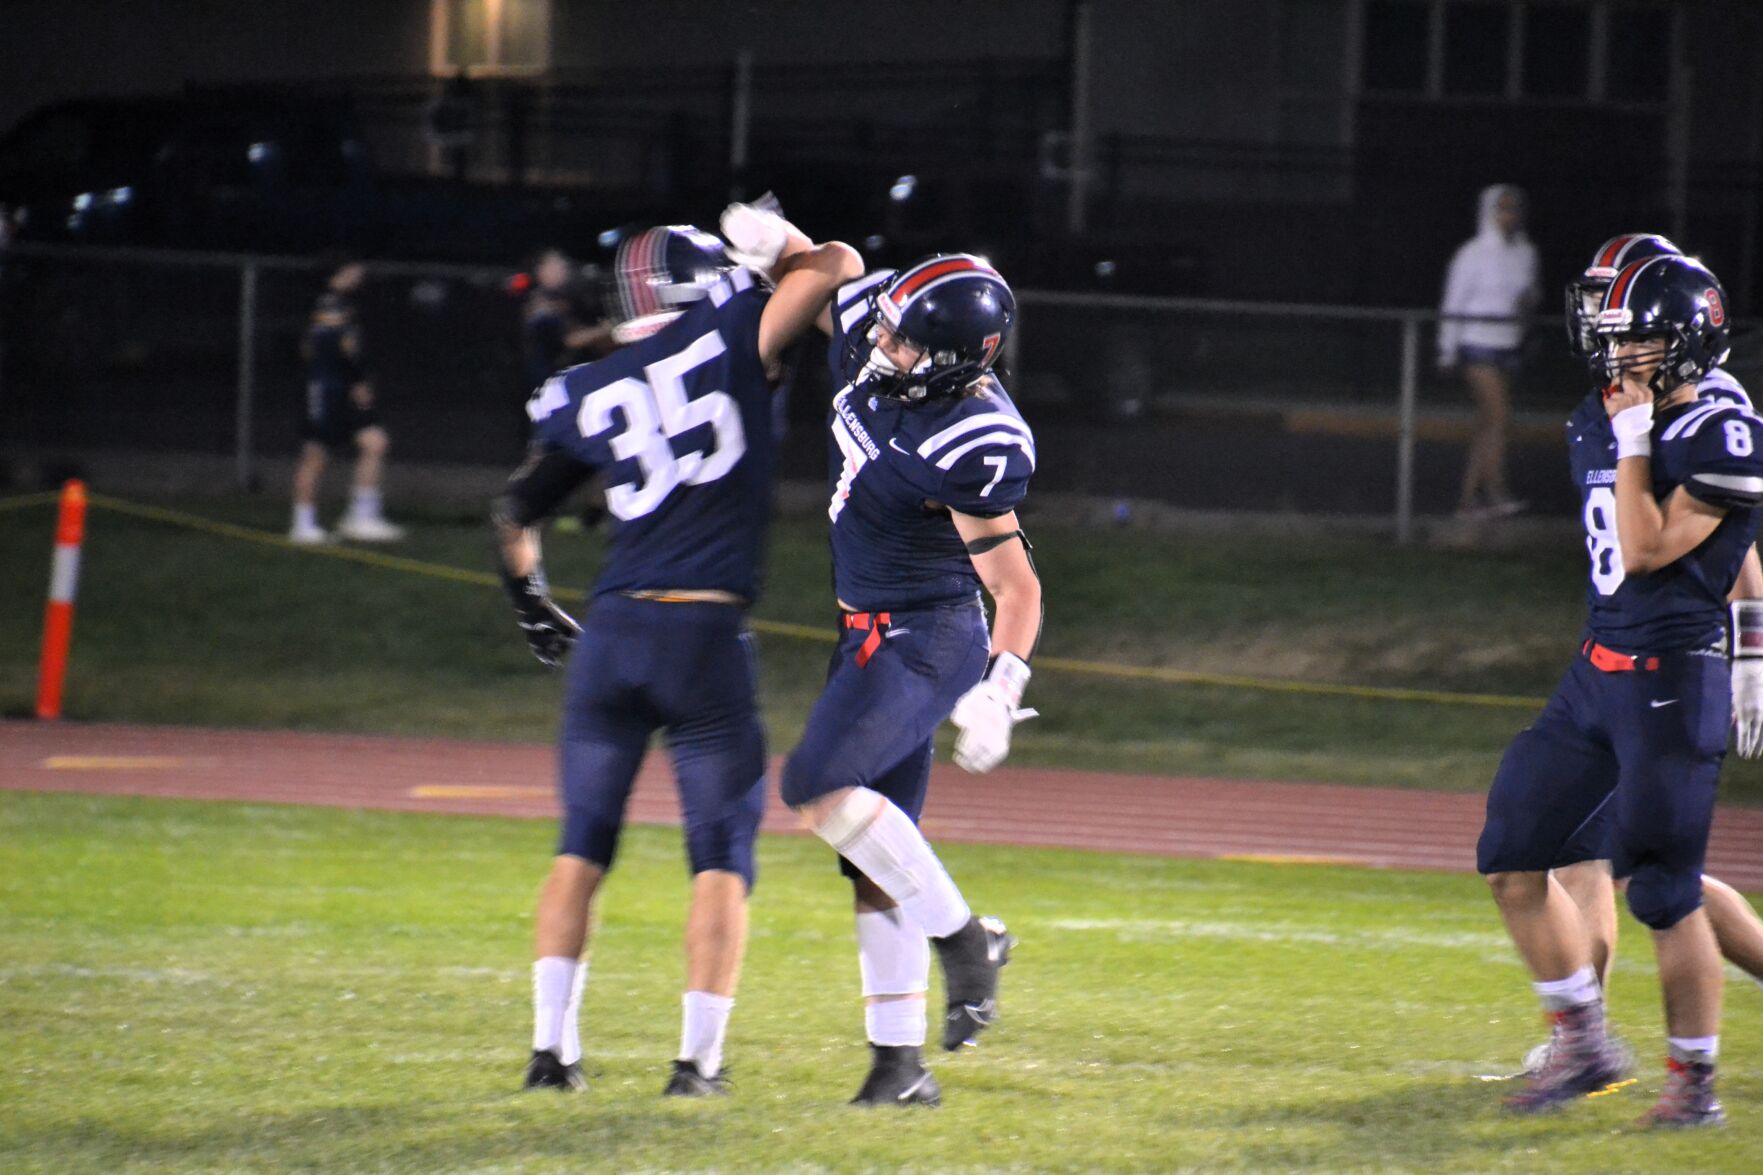 Prep roundup: Ellensburg football takes Prosser to the wire